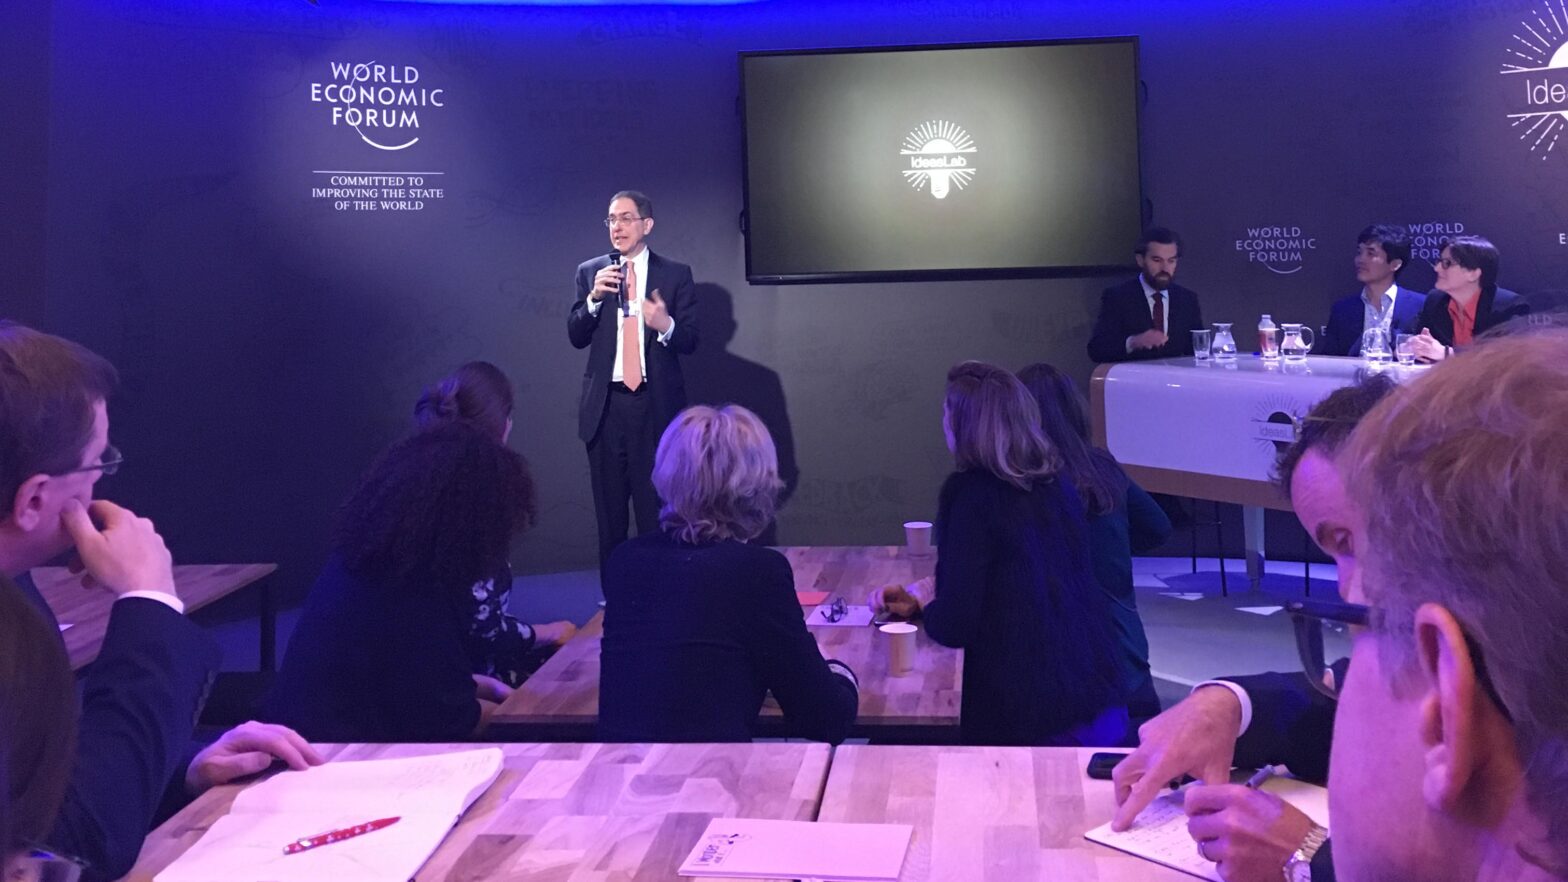 Princeton University President Christopher L. Eisgruber introduces an “IdeasLab” panel on “Understanding Neural and Digital Networks” on Thursday, Jan. 25, at the World Economic Forum in Davos, Switzerland.  Photo courtesy of World Economic Forum.